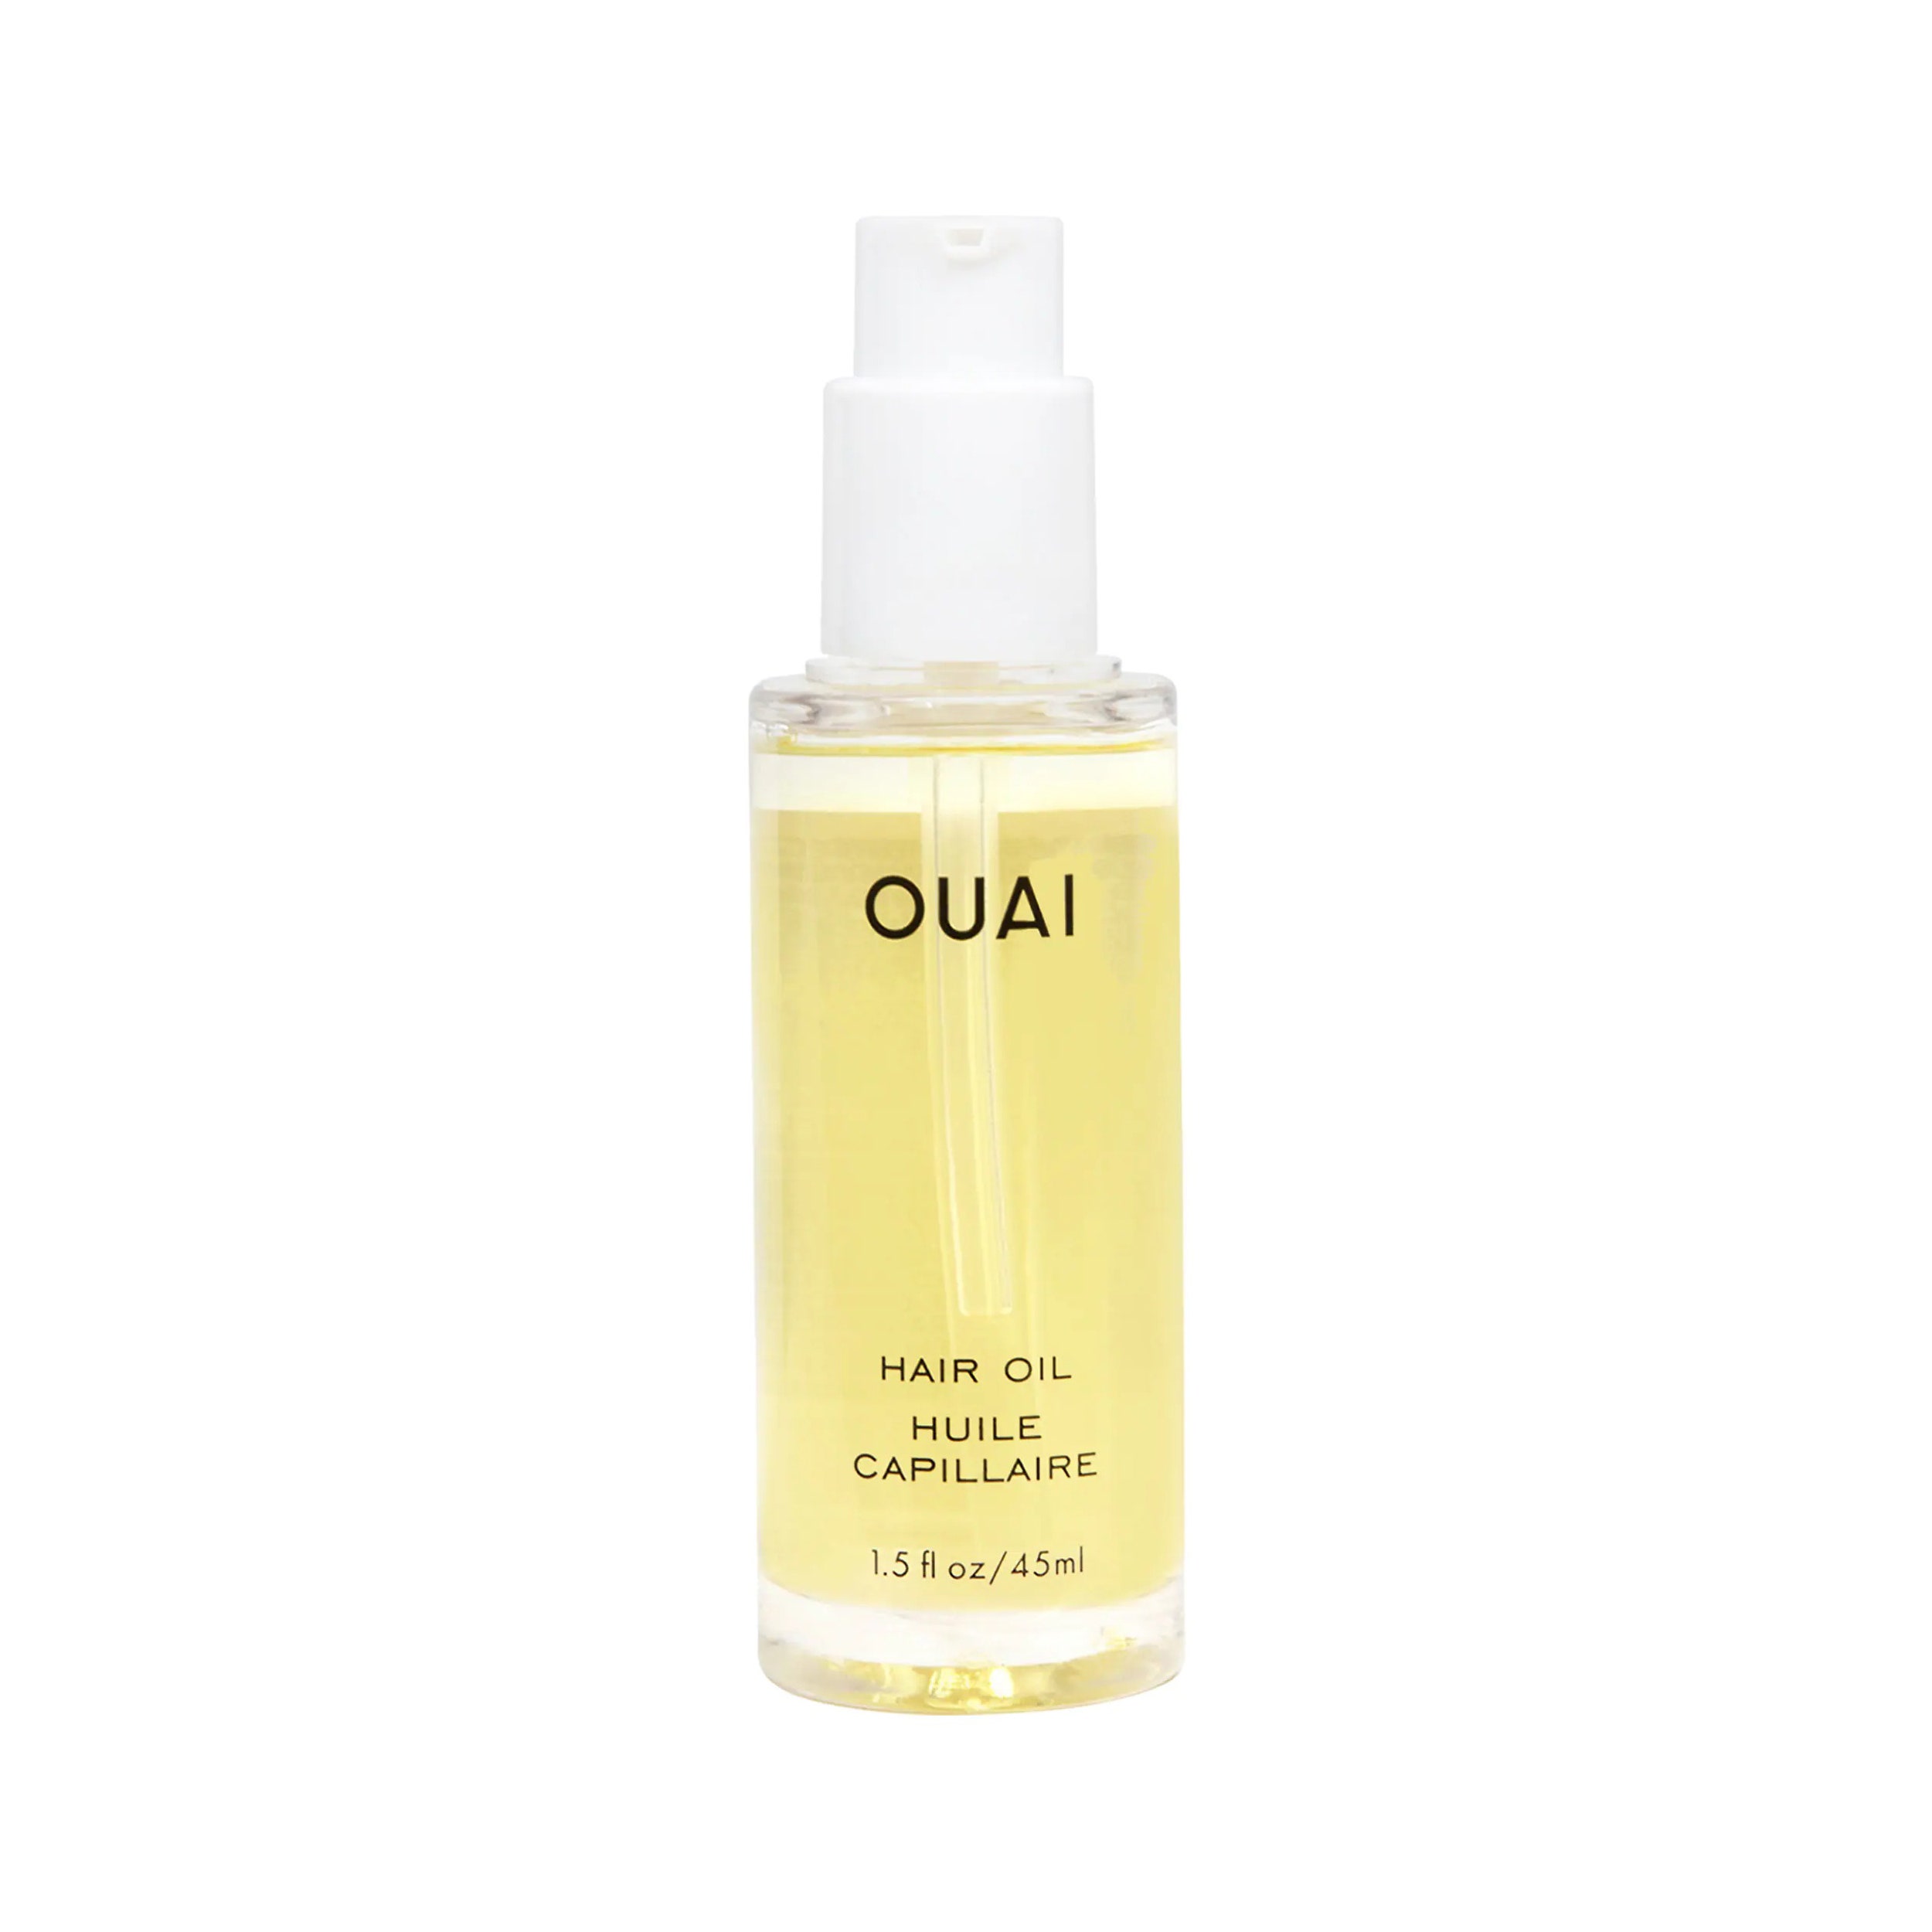 <p><strong>Why It's Worth It:</strong> Ouai's <a href="https://www.allure.com/gallery/best-hair-oils?mbid=synd_msn_rss&utm_source=msn&utm_medium=syndication">Hair Oil</a> is a lightweight elixir that <a href="https://www.instagram.com/alexbrownhair/">Alex Brown</a>, Chicago-based hairstylist and owner of <a href="https://www.instagram.com/spacebyalexbrown/">Space by Alex Brown</a>, says is the best for fine hair types that are concerned with frizz. "It won't weigh the hair down but will help reduce frizz," she says. You can thank a blend of conditioning ama, borage, and baobab seed oils for its lightweight yet impactful formula.</p> <p><strong>Editor Tip:</strong> If you heat style often, that could be the root of your frizzy situation. Thankfully, this hair oil also acts as a <a href="https://www.allure.com/gallery/ten-heat-protectants-under-20?mbid=synd_msn_rss&utm_source=msn&utm_medium=syndication">heat protectant</a> and guards each strand against heat damage at up to 450 degrees Fahrenheit.</p> <p><strong>Key Ingredients:</strong> Ama oil, borage oil, baobab seed oil | <strong>Who It's For:</strong> Anyone who needs weightless strand-softening moisture.</p> $30, Ulta Beauty. <a href="https://www.ulta.com/p/hair-oil-pimprod2012515">Get it now!</a><p>Get your daily dose of beauty tips, tricks, and product recommendations sent straight to your inbox.</p><a href="https://www.allure.com/newsletter/subscribe?sourceCode=msnsend">Sign Up Now</a>